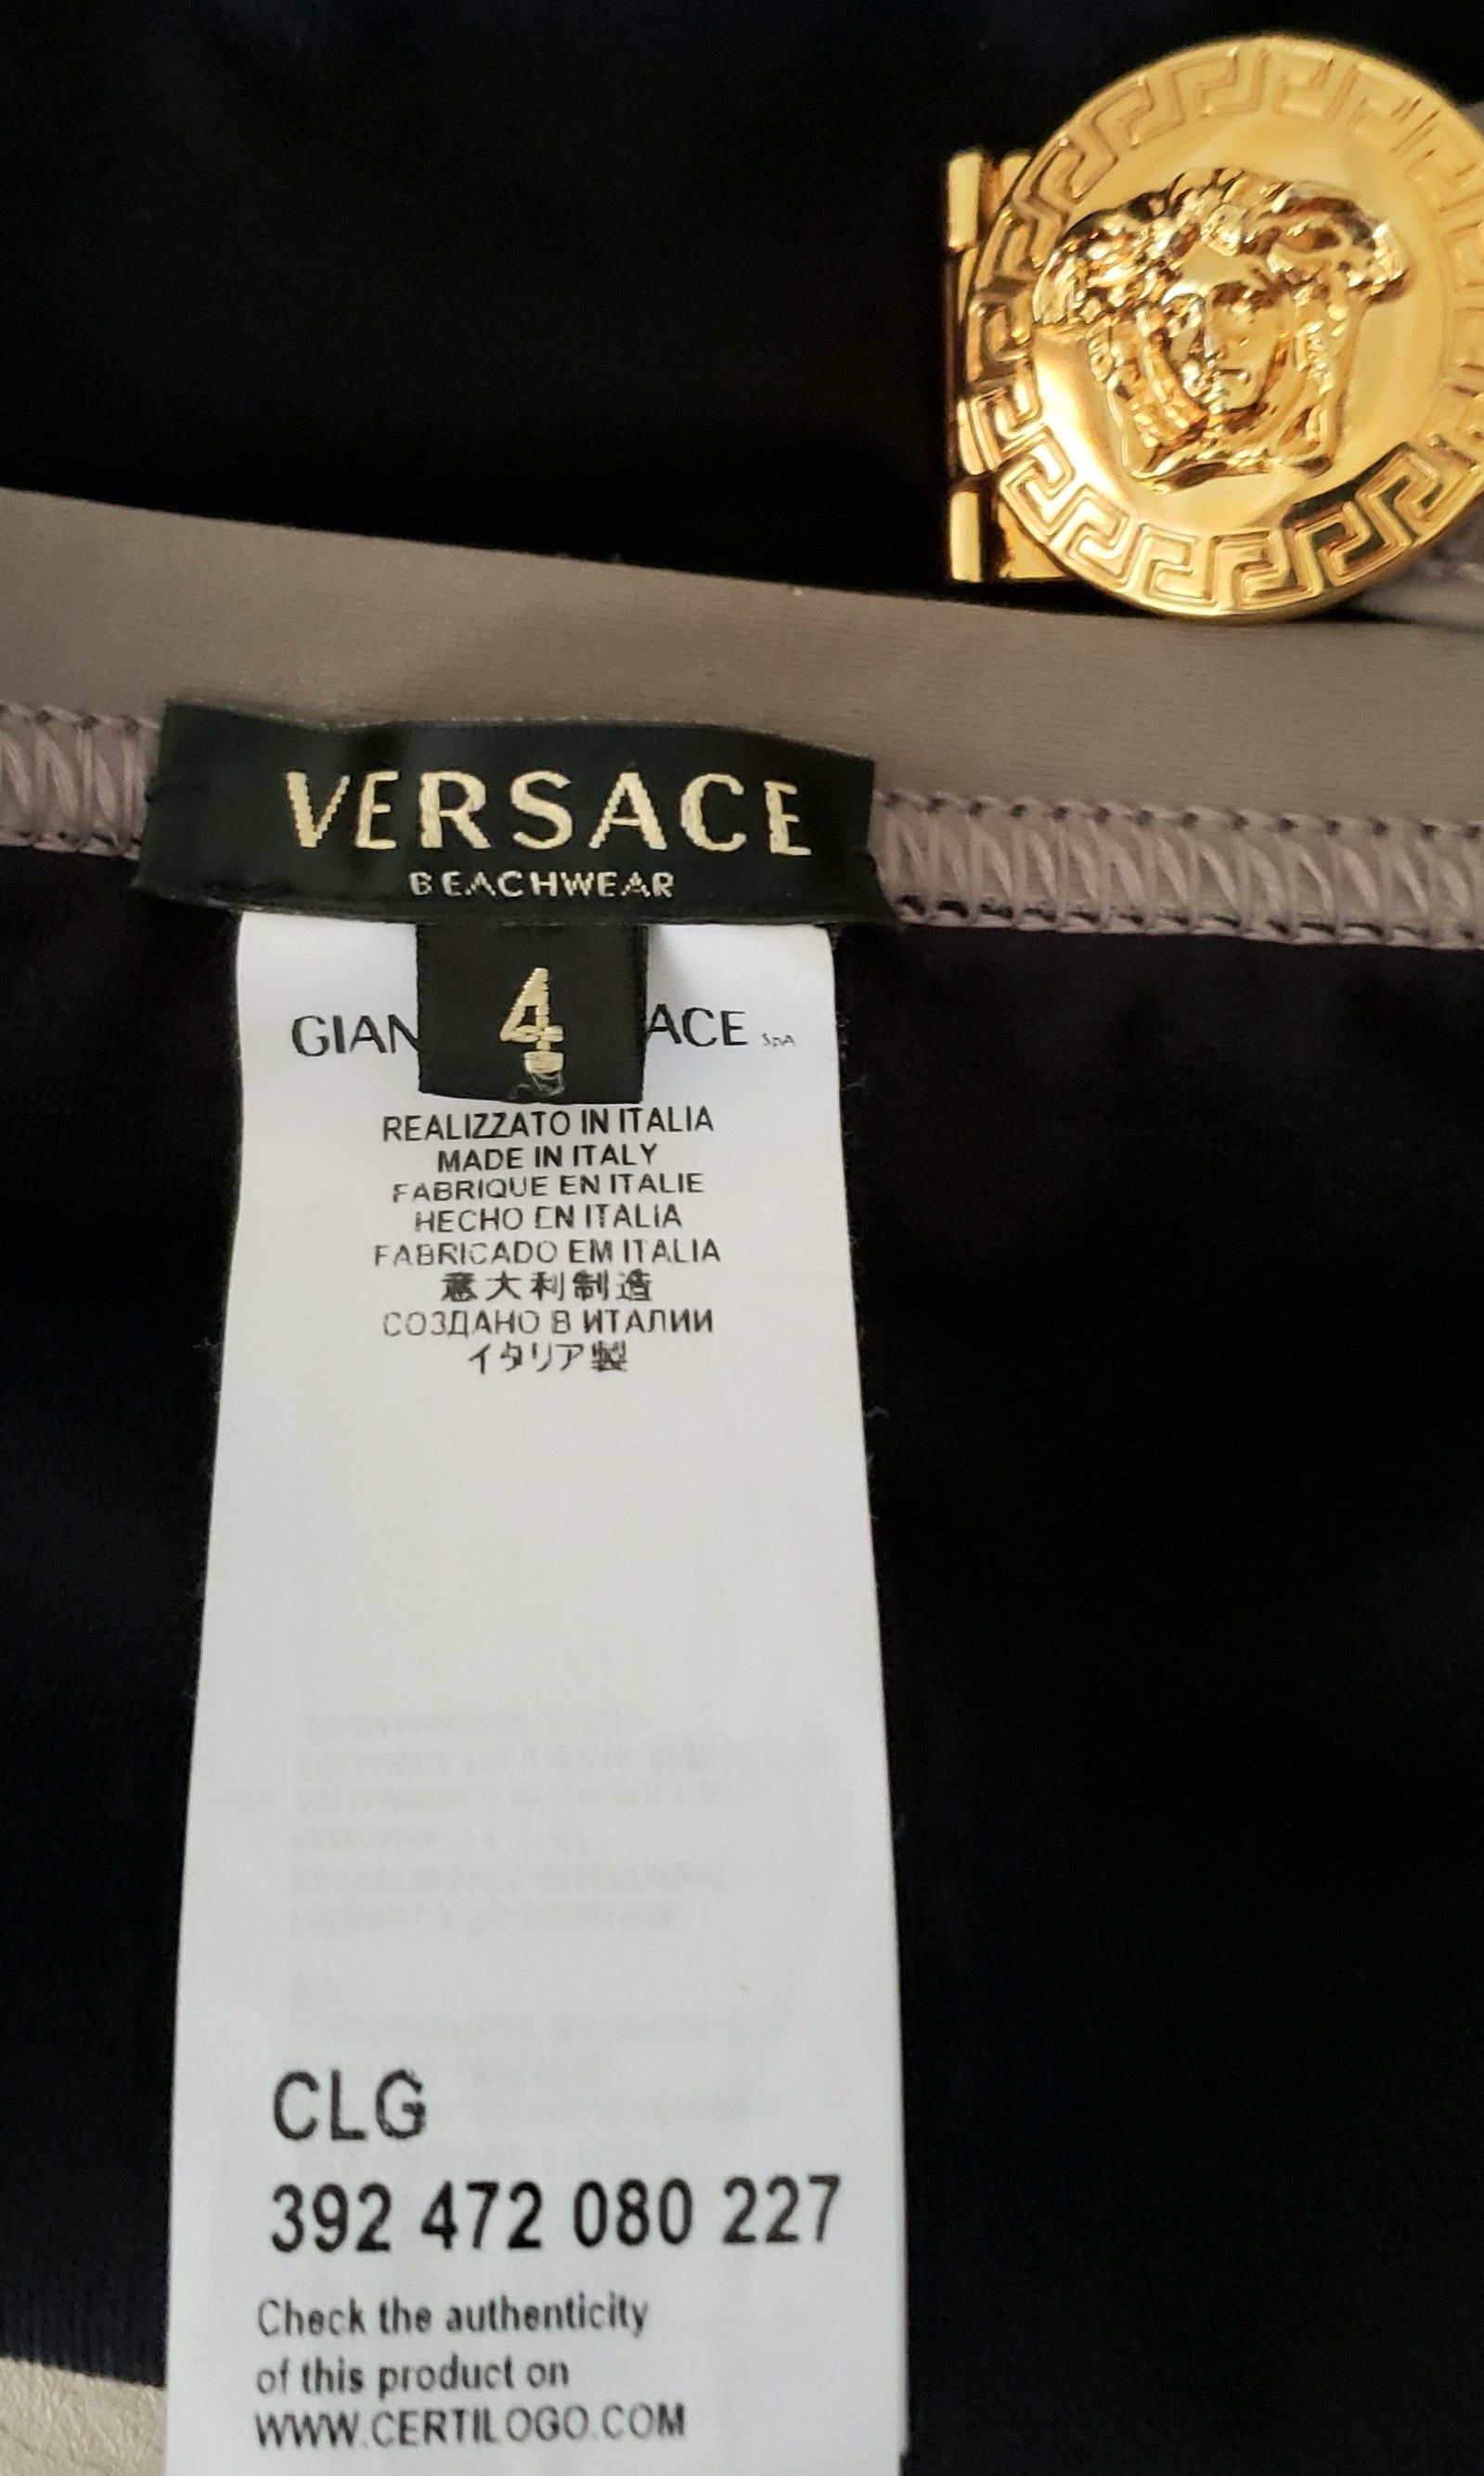 2014 S/S L#29 VERSACE PEWTER SWIMMING TRUNKS 24K Gold Plated Hardware 5